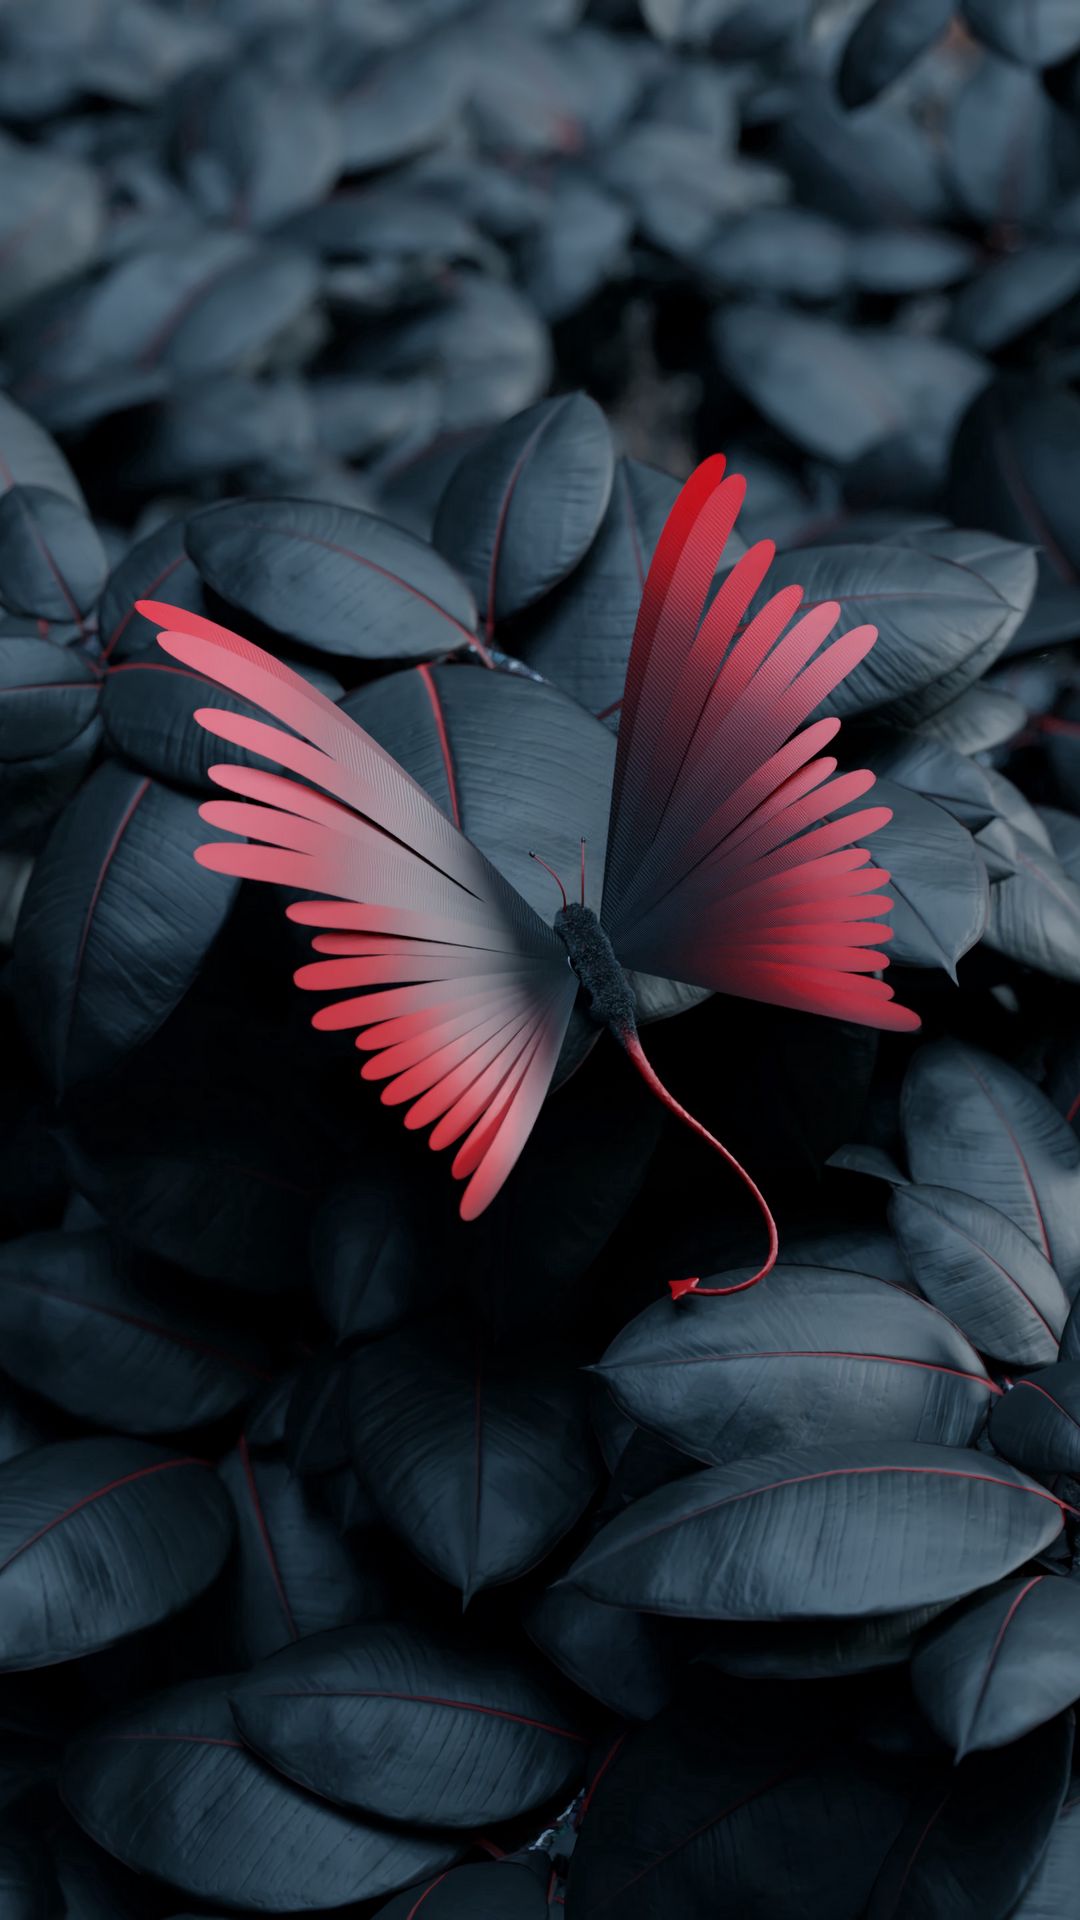 Watch the beautiful butterfly wallpaper on your phone to refresh your mind and soul. With vivid colors and exquisite details, the images will bring you a sense of peace and harmony, and make your phone look more beautiful and lively.